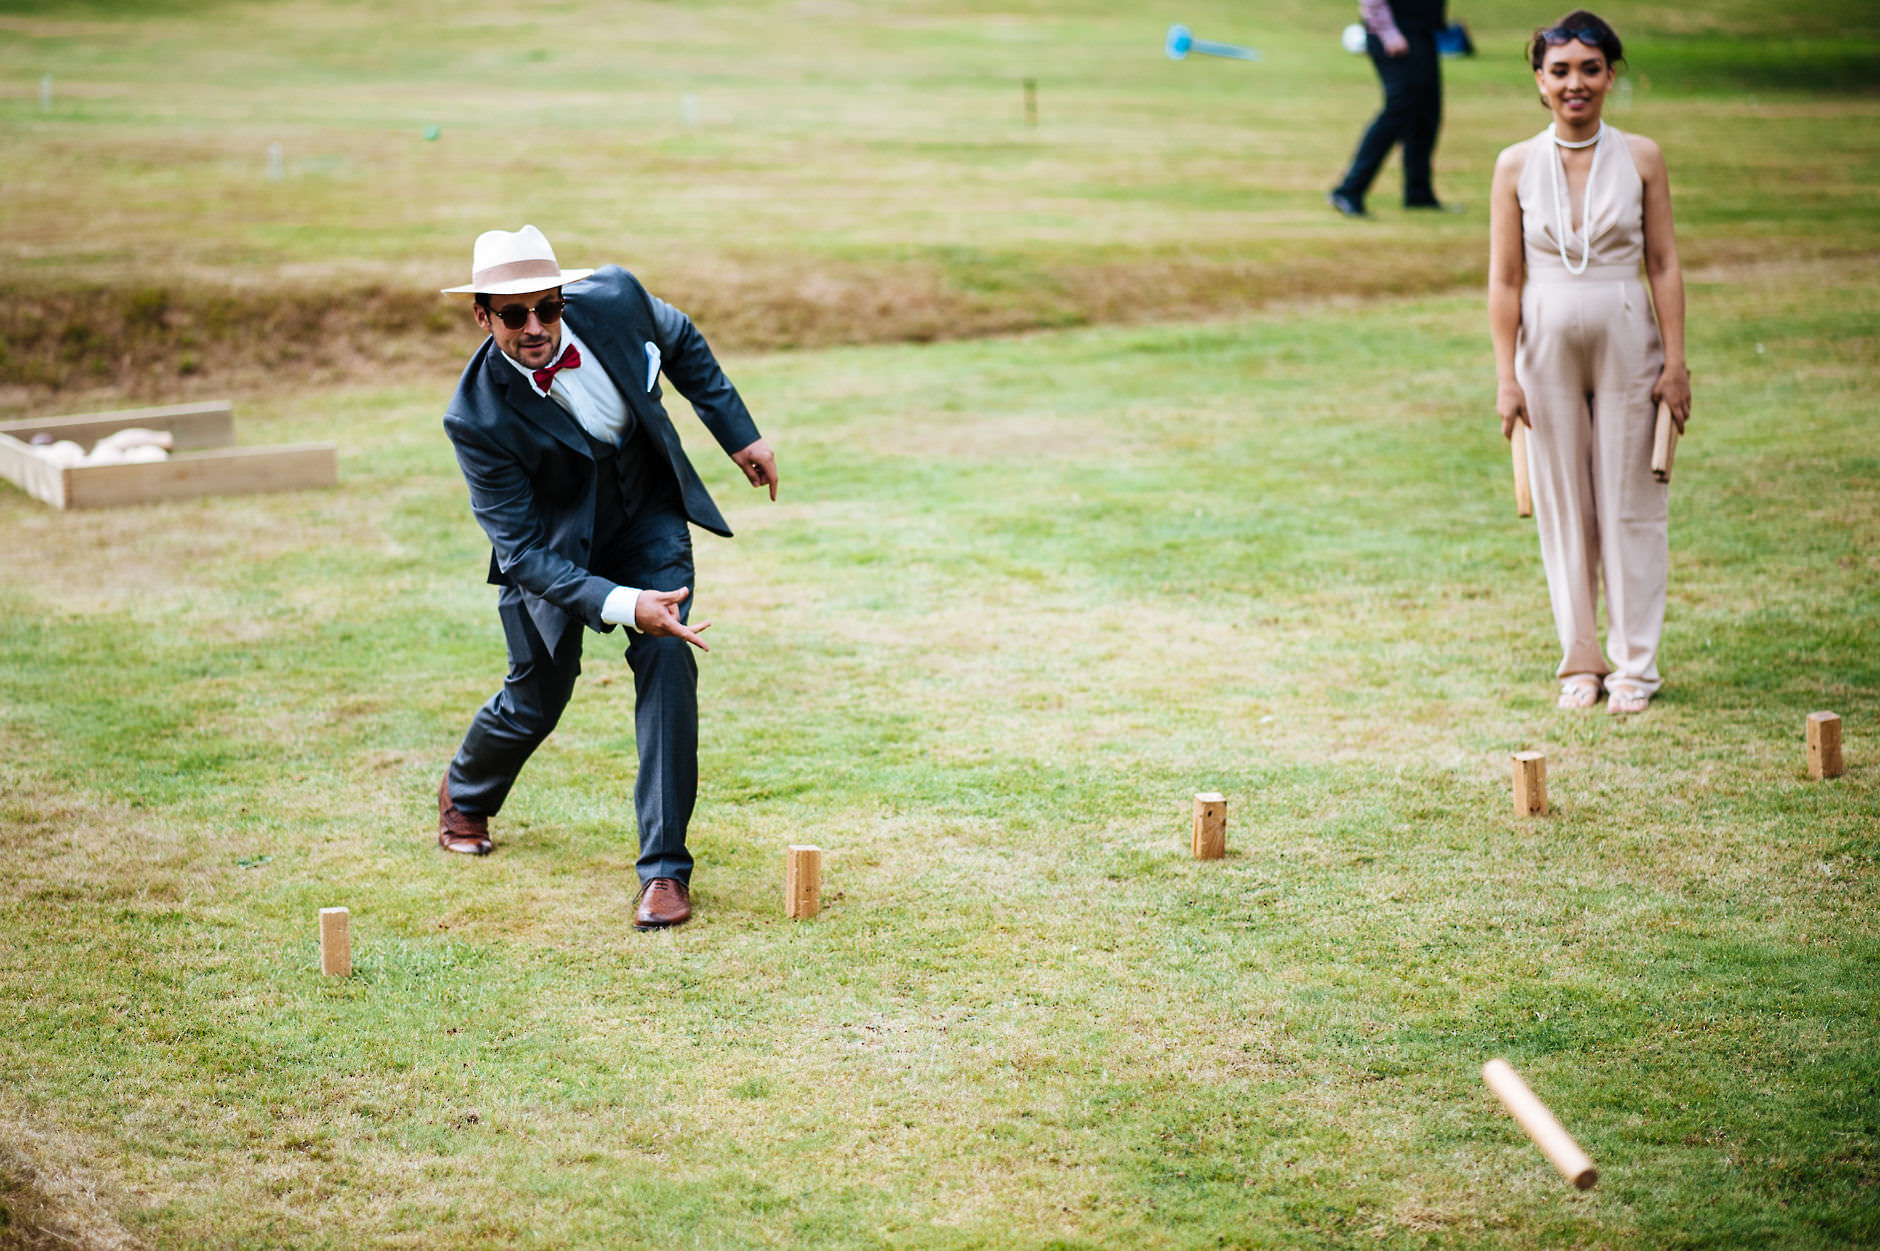 more lawn games for the guests